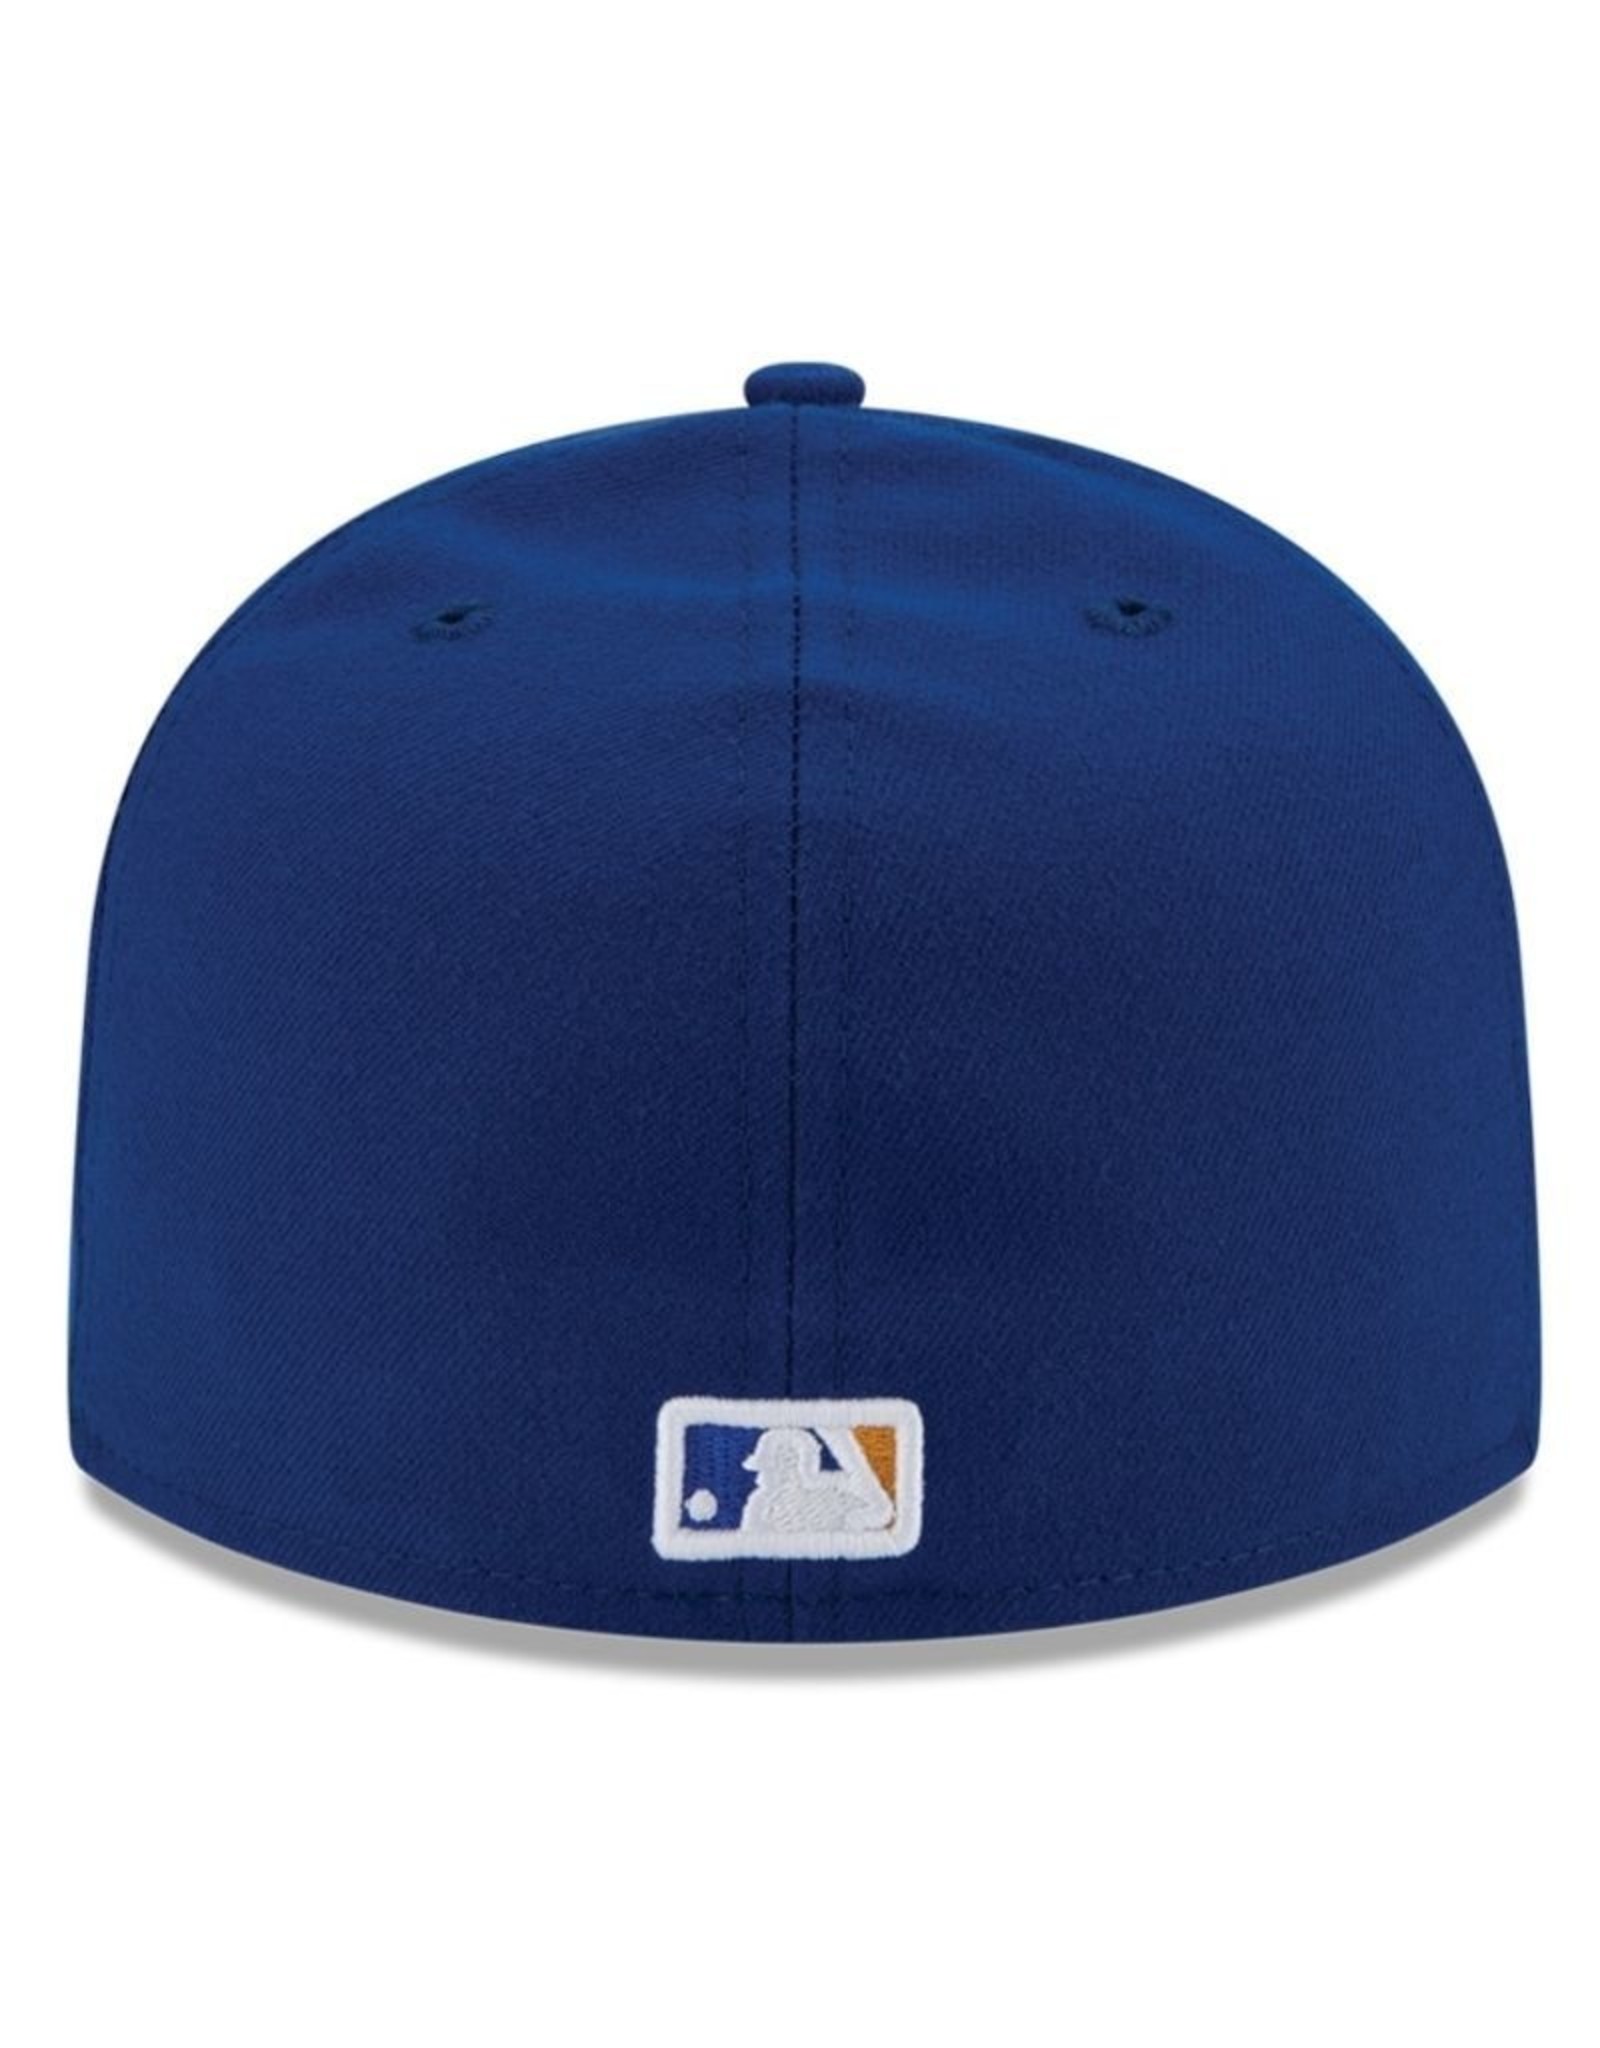 New Era On-Field Authentic 59FIFTY Alternate 2 Hat Seattle Mariners Royal